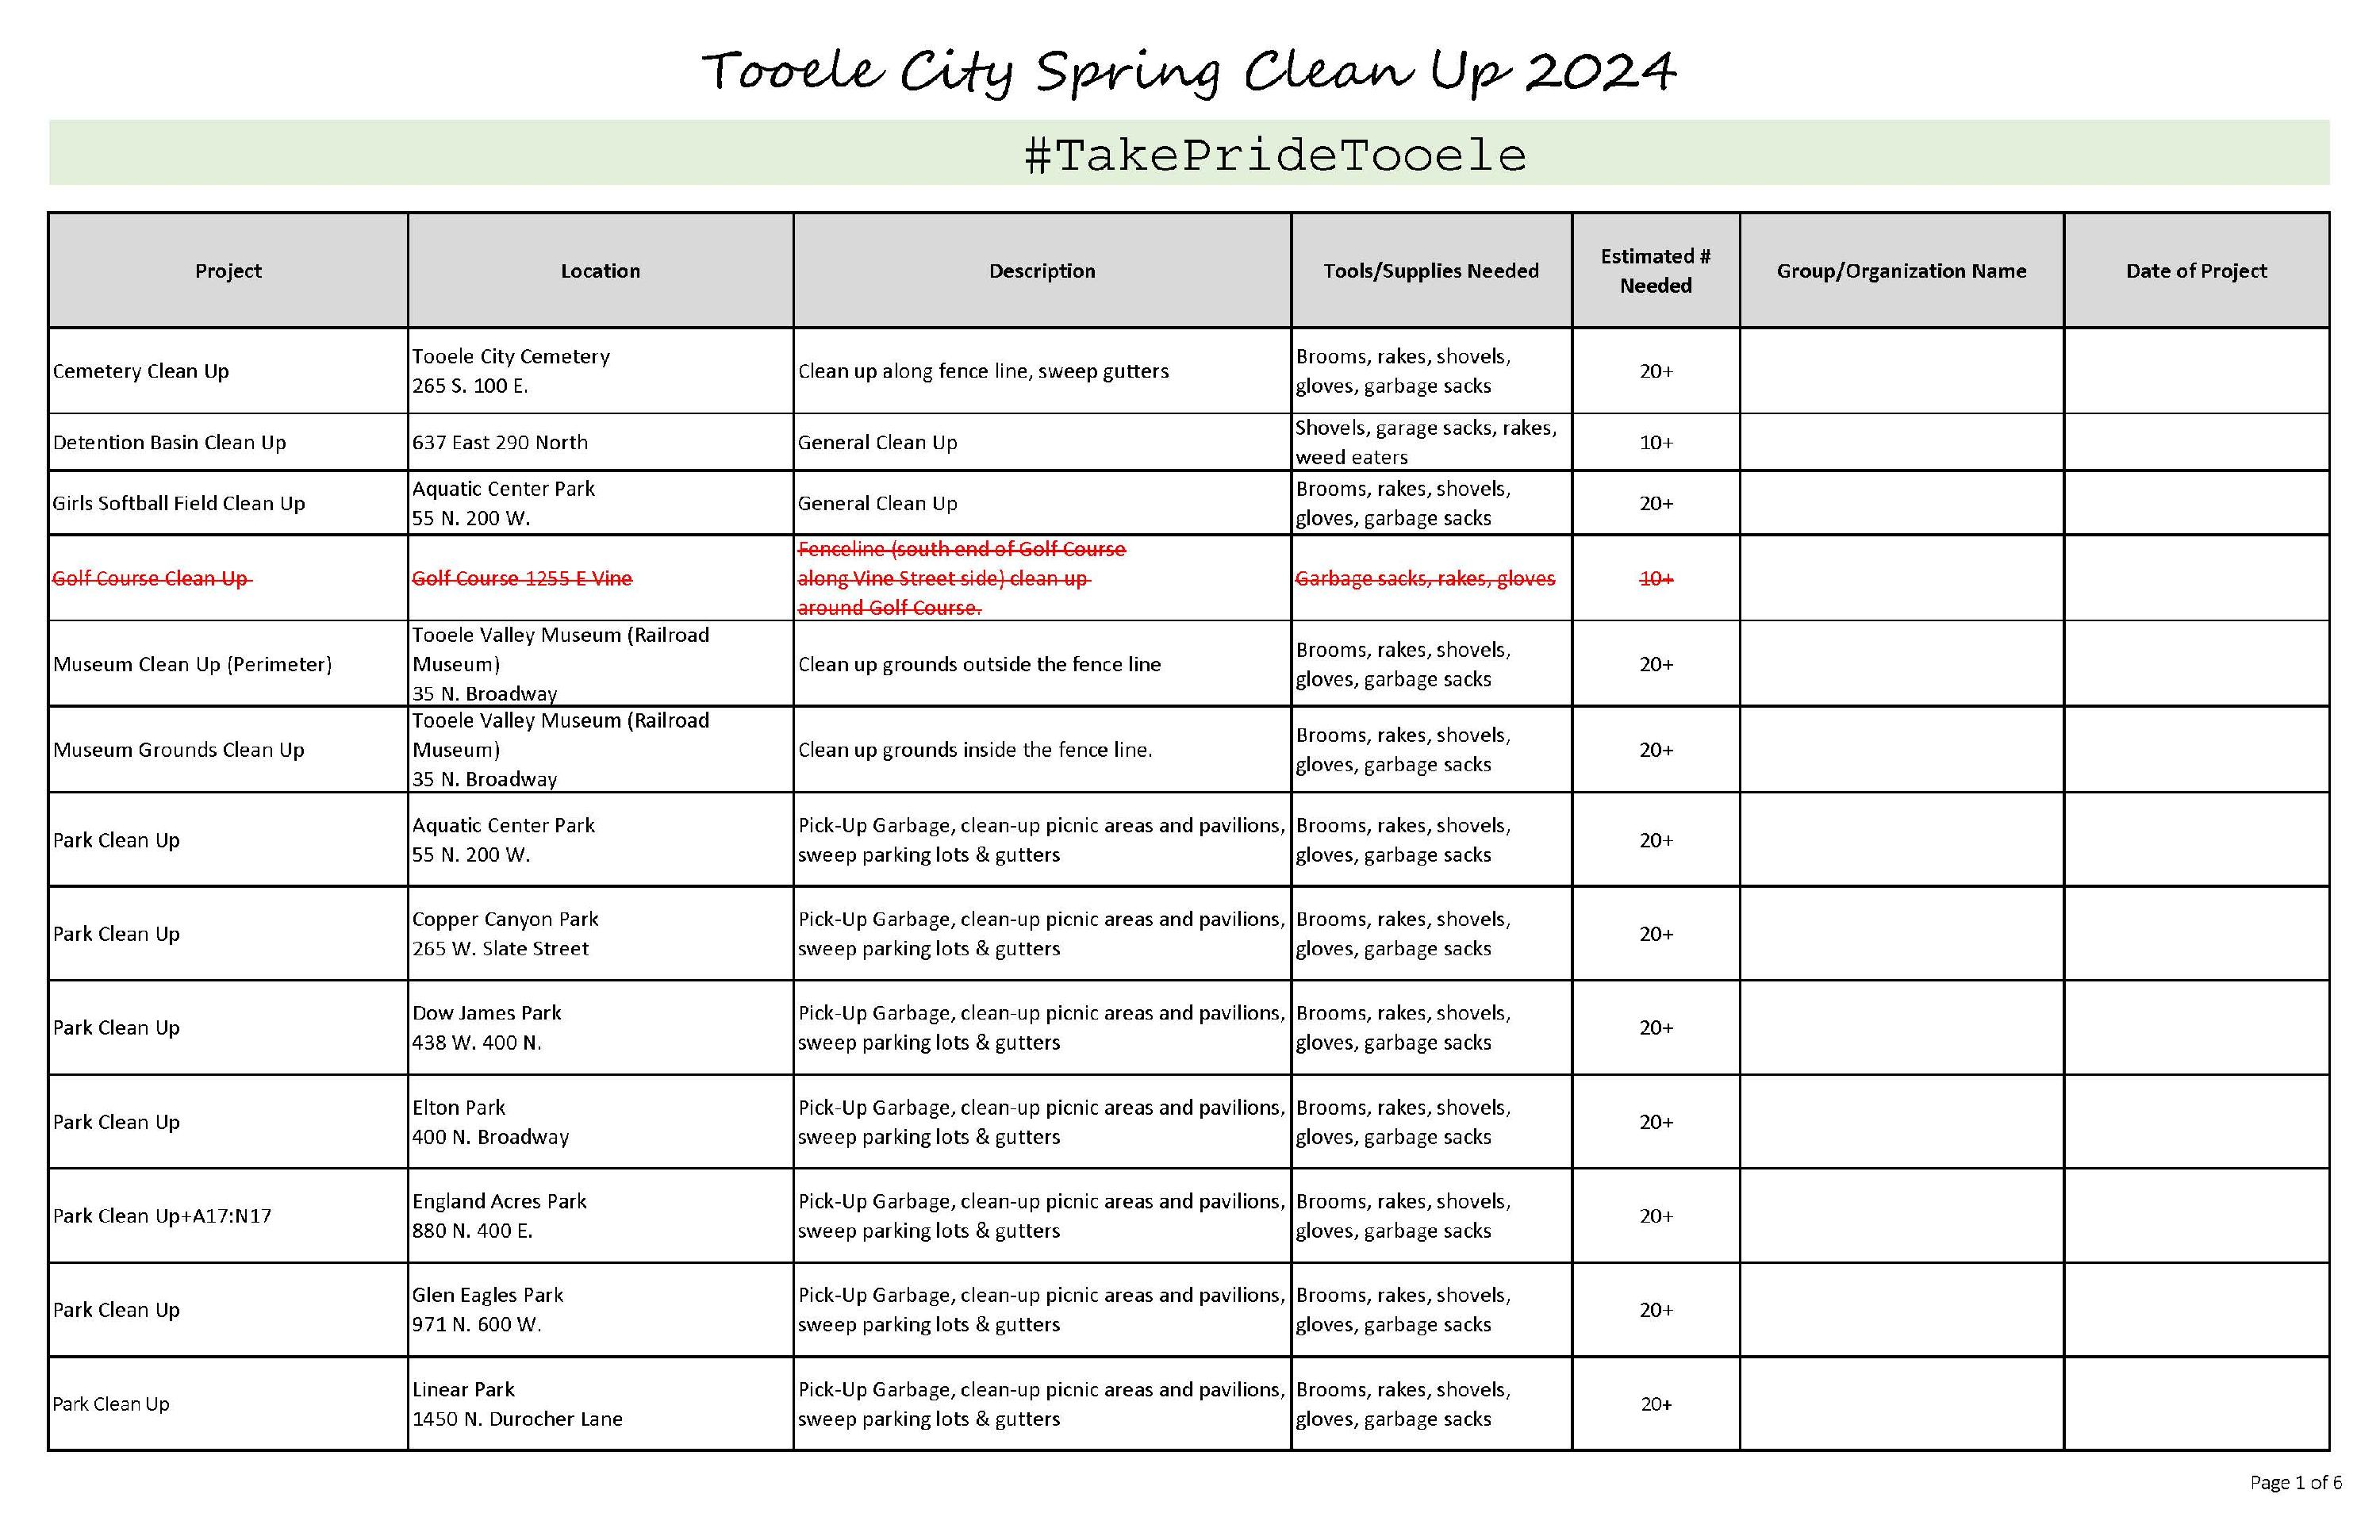 Spring Clean Up Projects 2024 Image